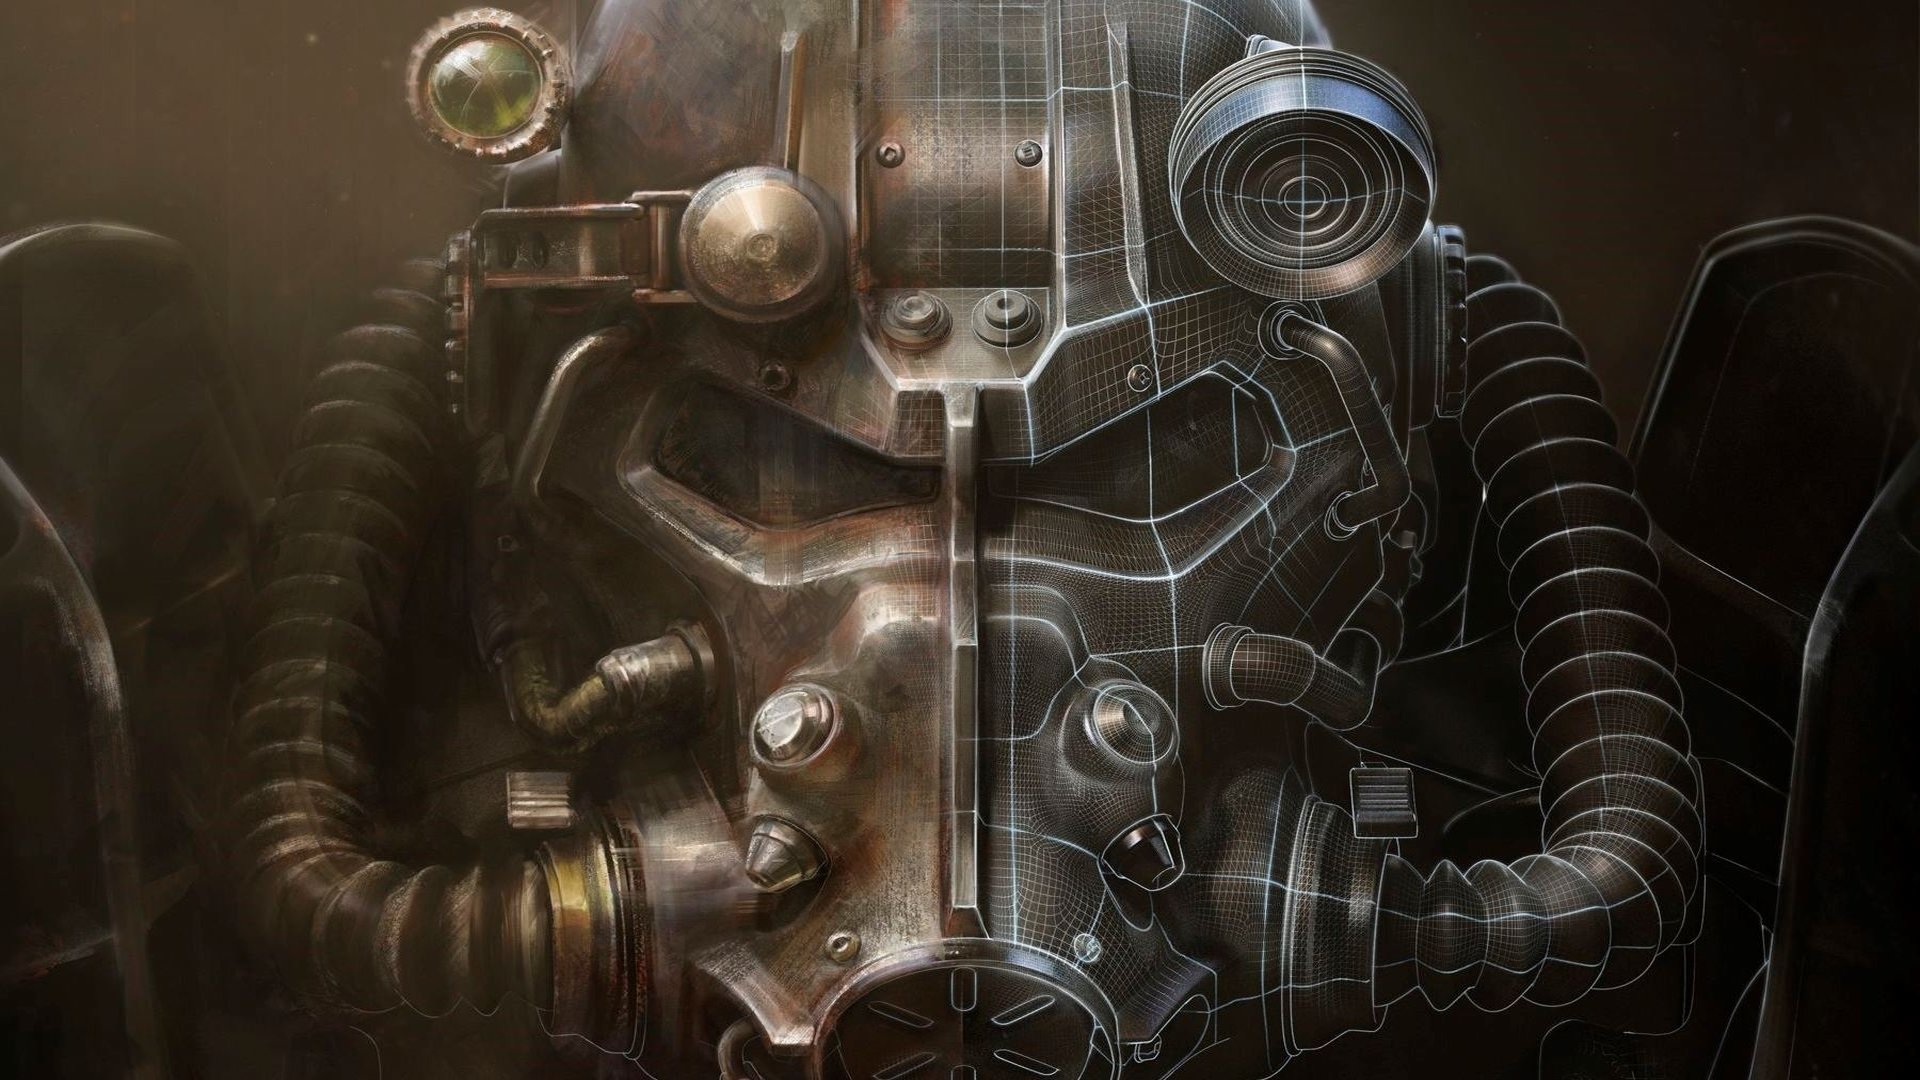 Download full hd 1920x1080 Fallout 4 computer wallpaper ID:339858 for free